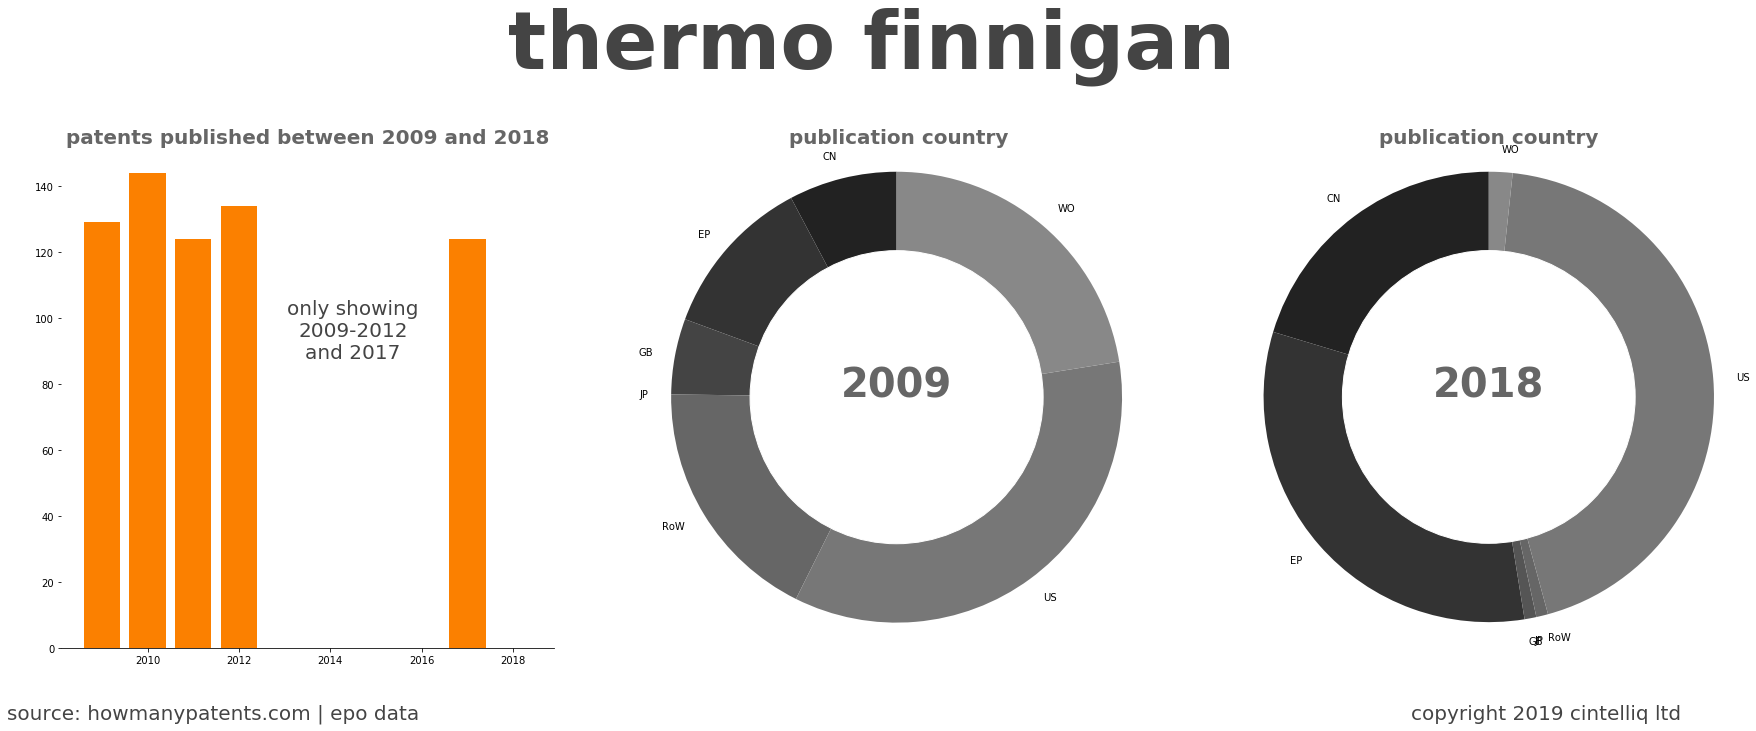 summary of patents for Thermo Finnigan